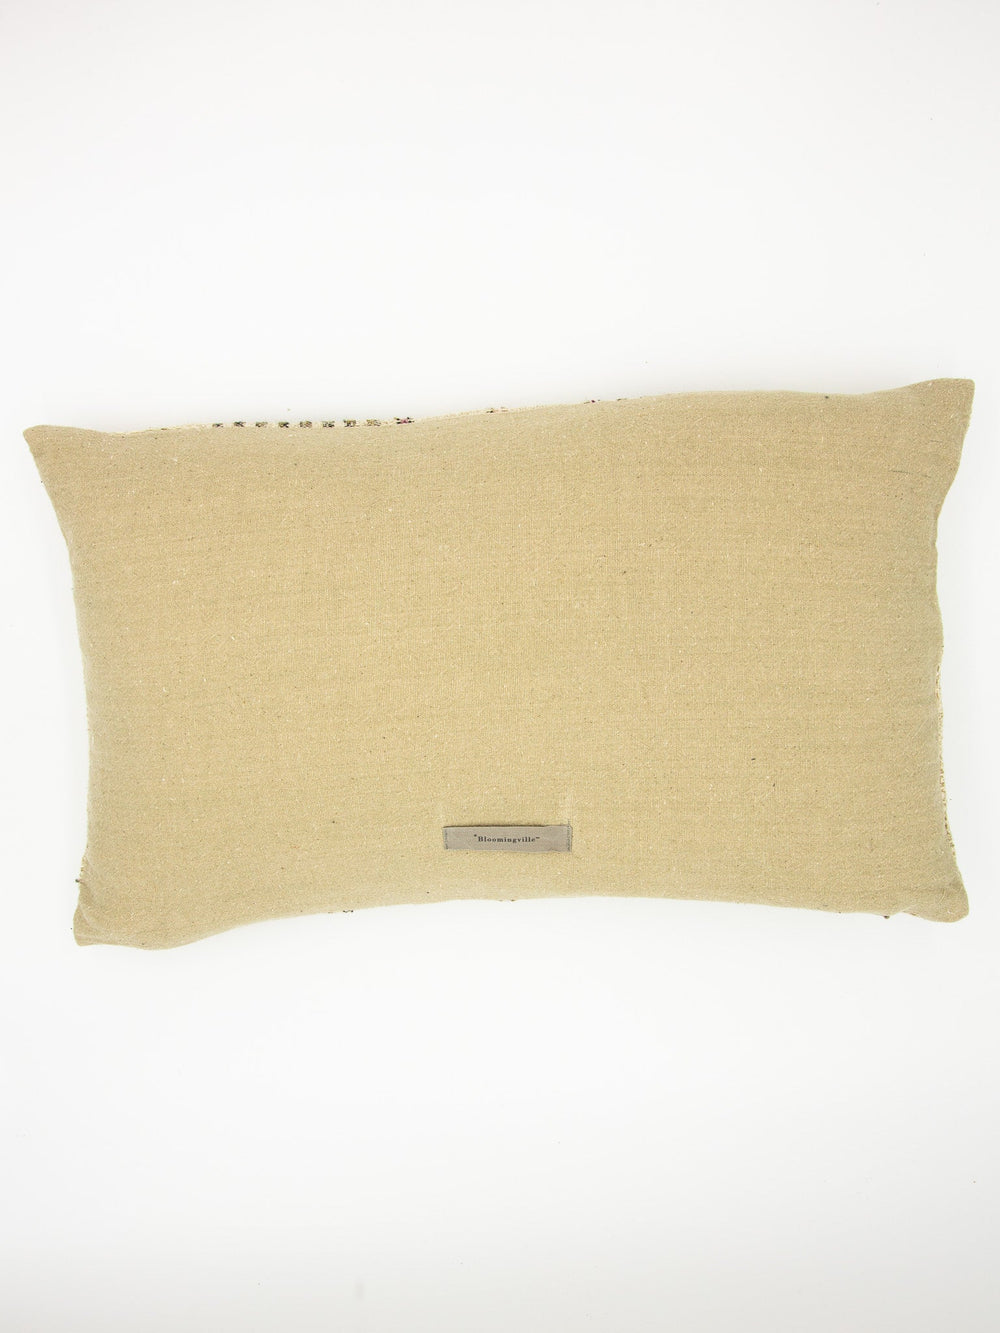 Embroidered Stripe Lumbar Pillow - Heyday